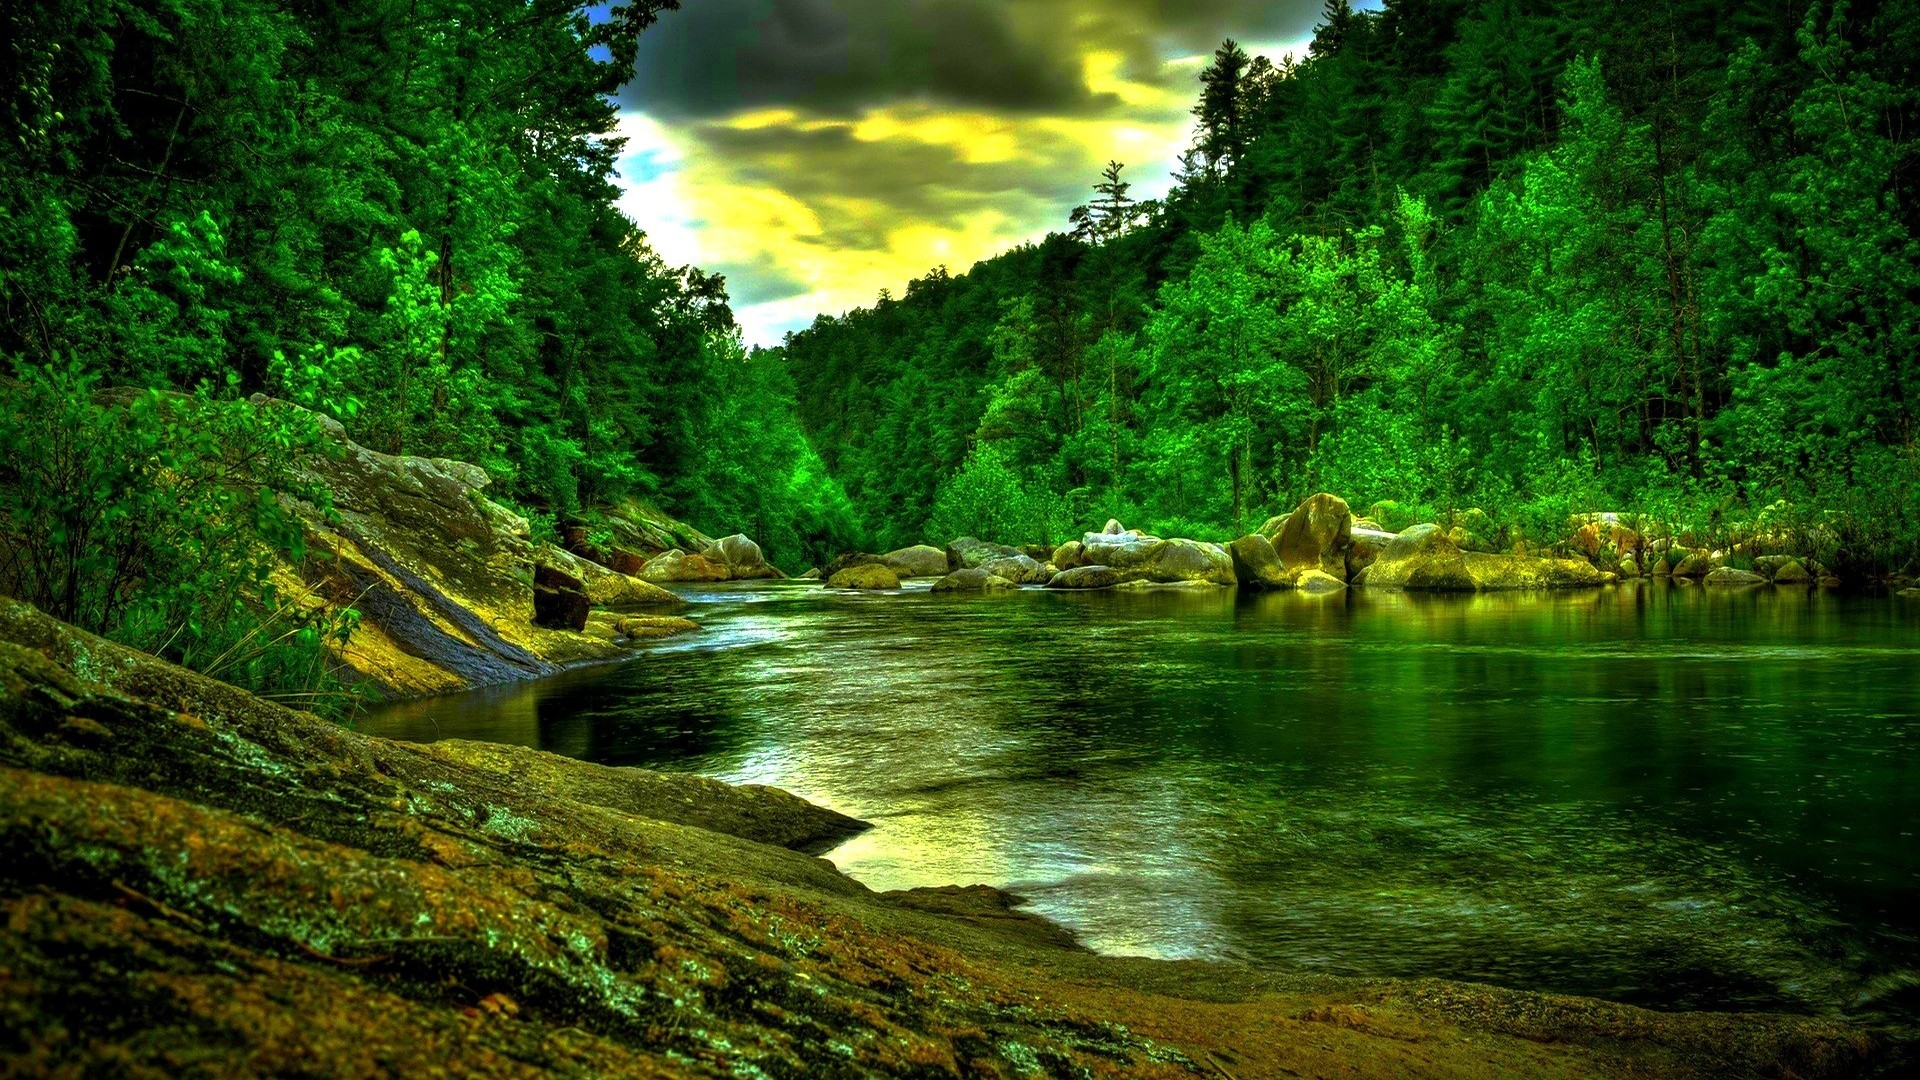 1920x1080 Download Beautiful Green Forest River Wide HD Wallpaper. Search more